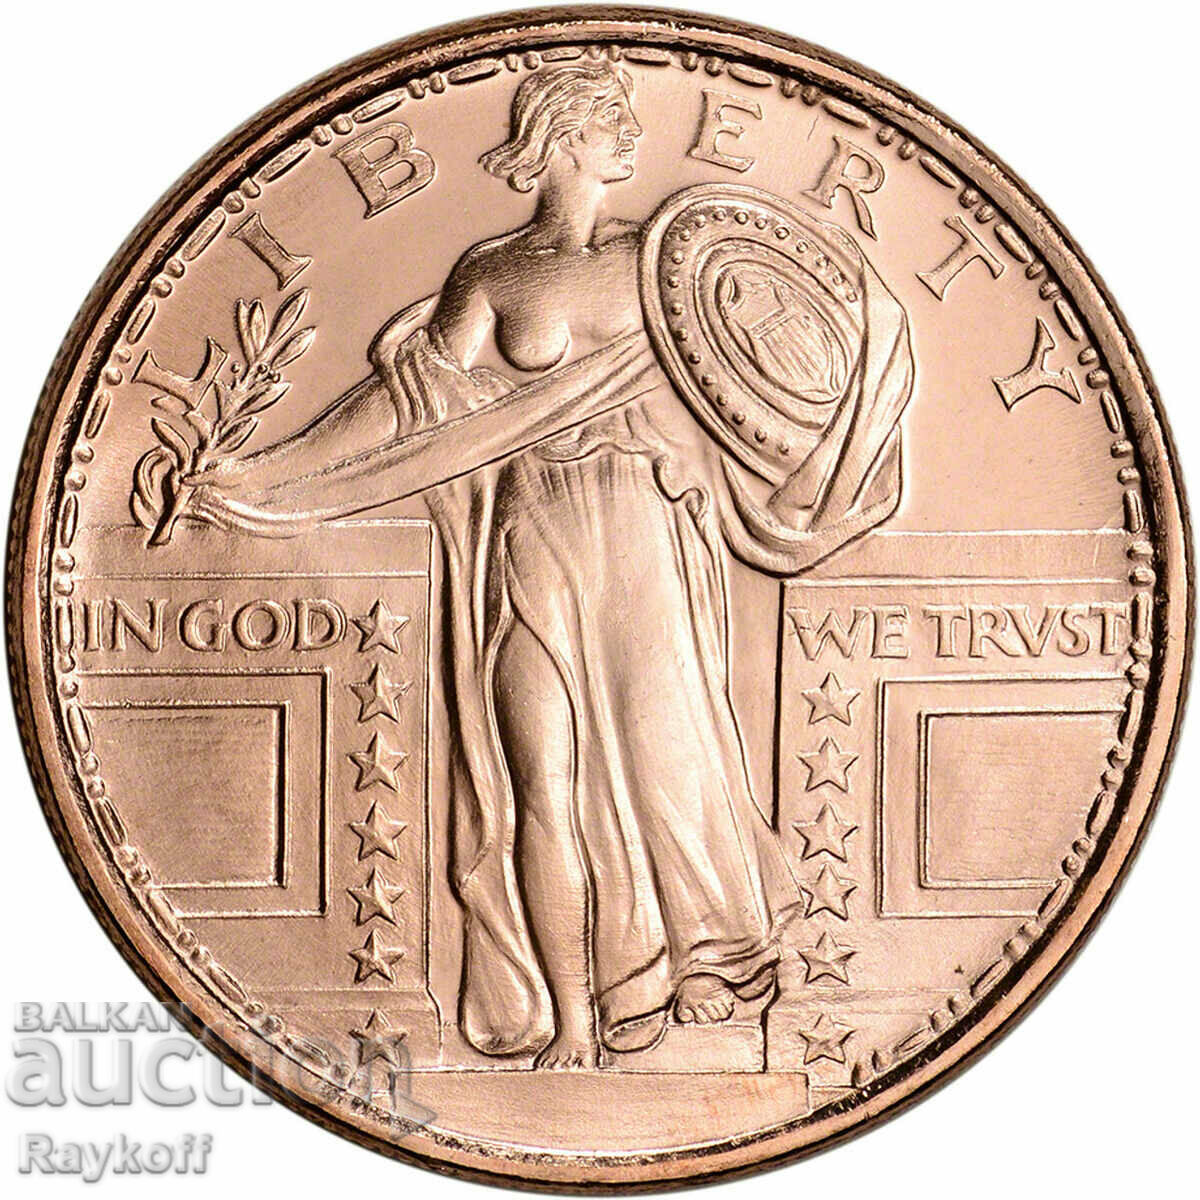 1 oz Golden State Mint Standing Liberty 999 Fine Copper Round